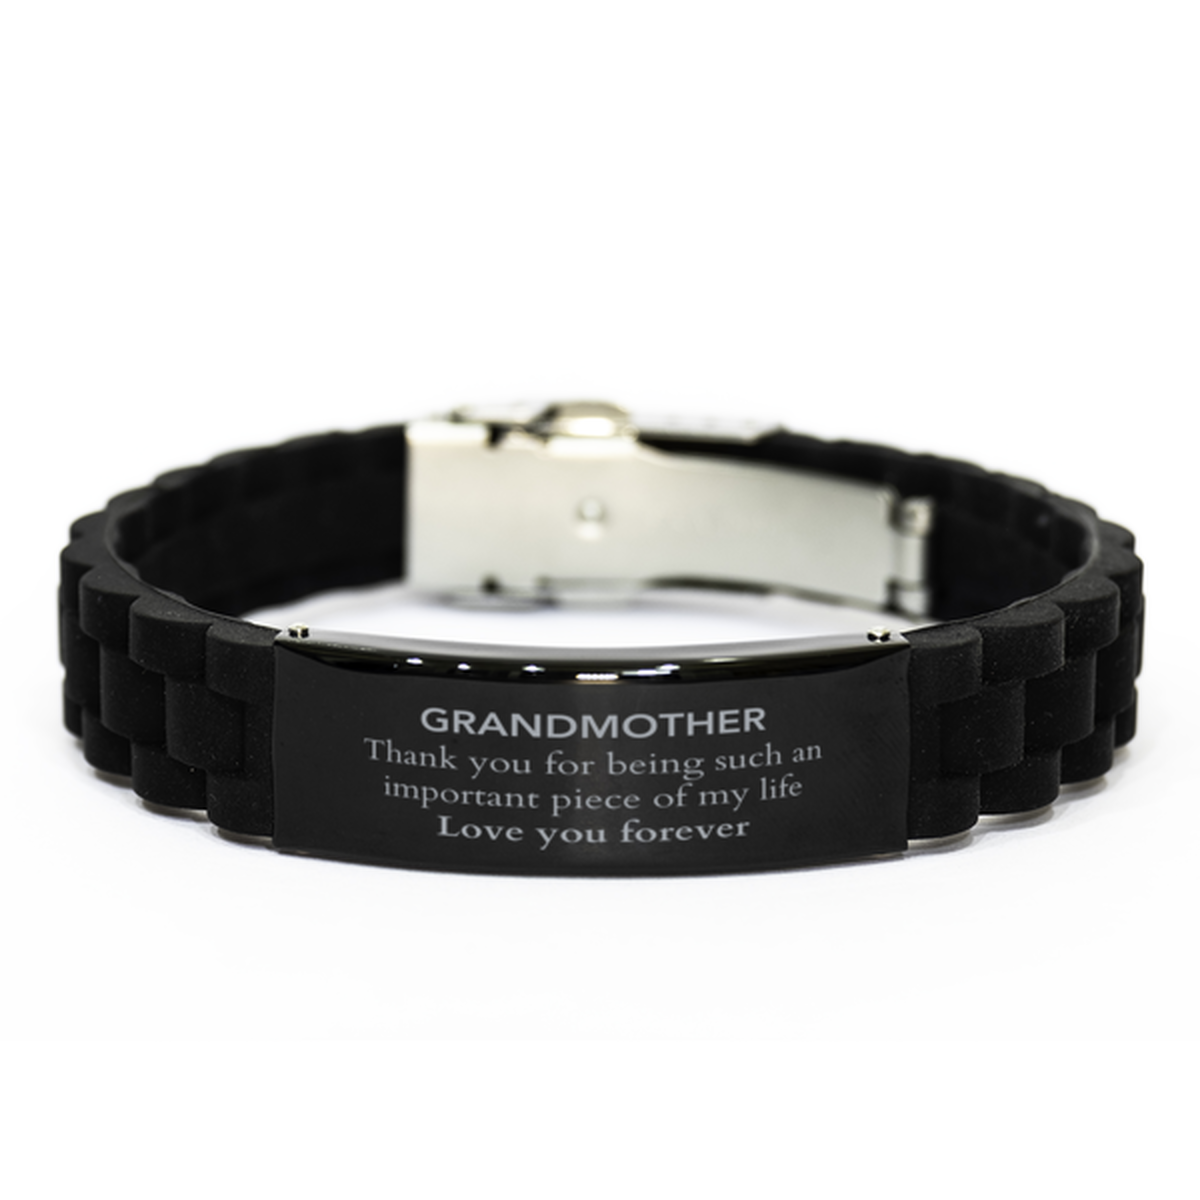 Appropriate Grandmother Black Glidelock Clasp Bracelet Epic Birthday Gifts for Grandmother Thank you for being such an important piece of my life Grandmother Christmas Mothers Fathers Day